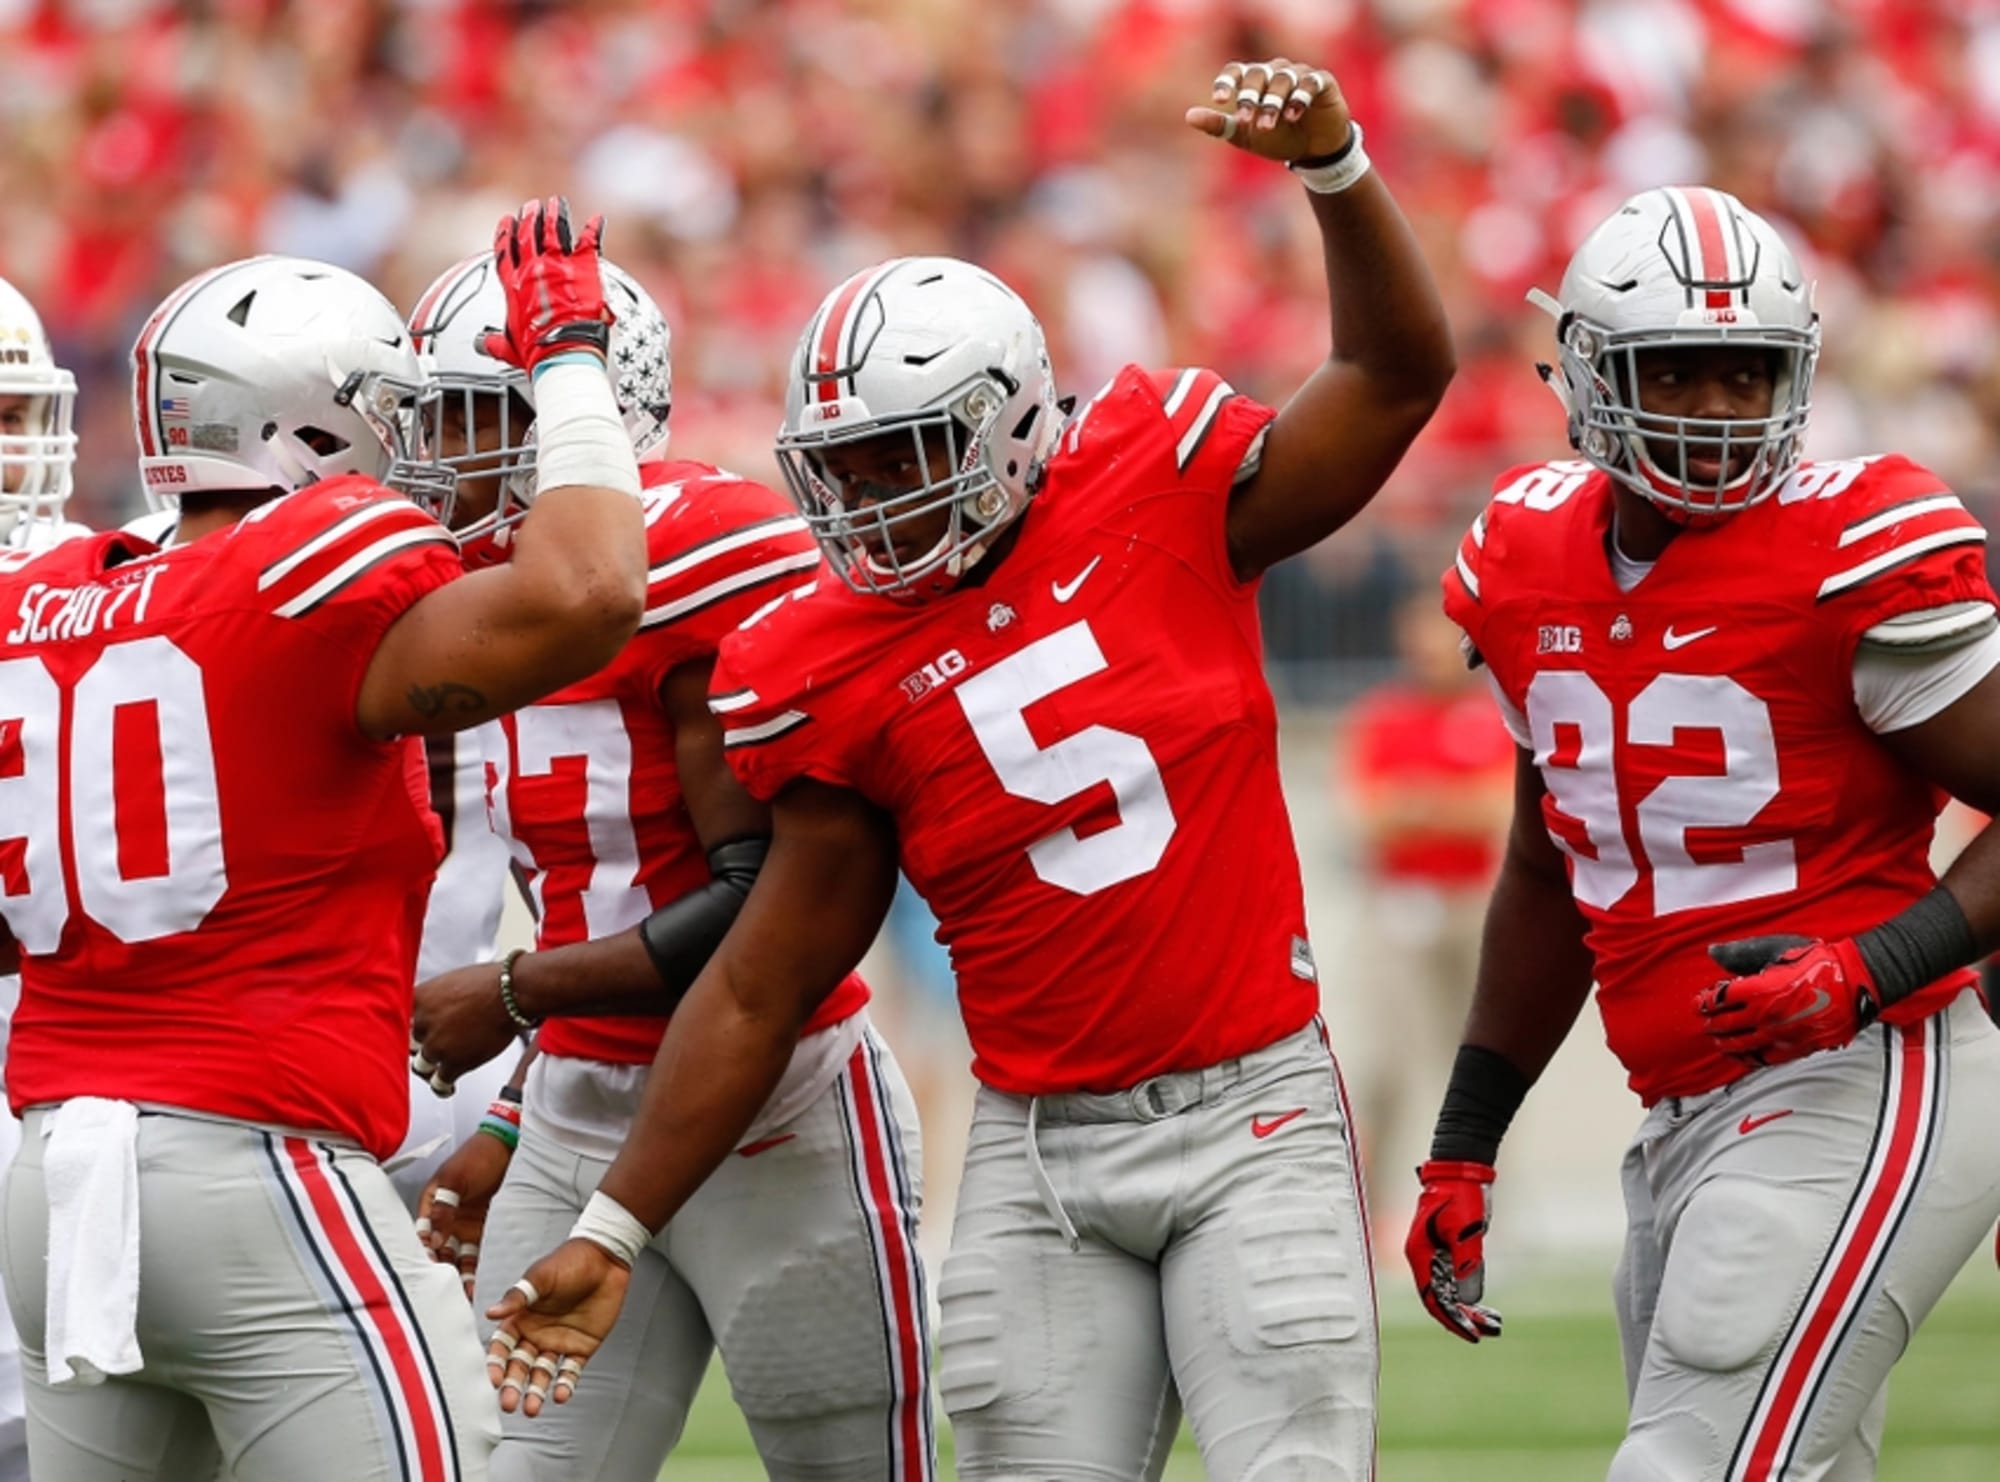 How Many Ohio State Players Will be Drafted in 1st Round This Year?